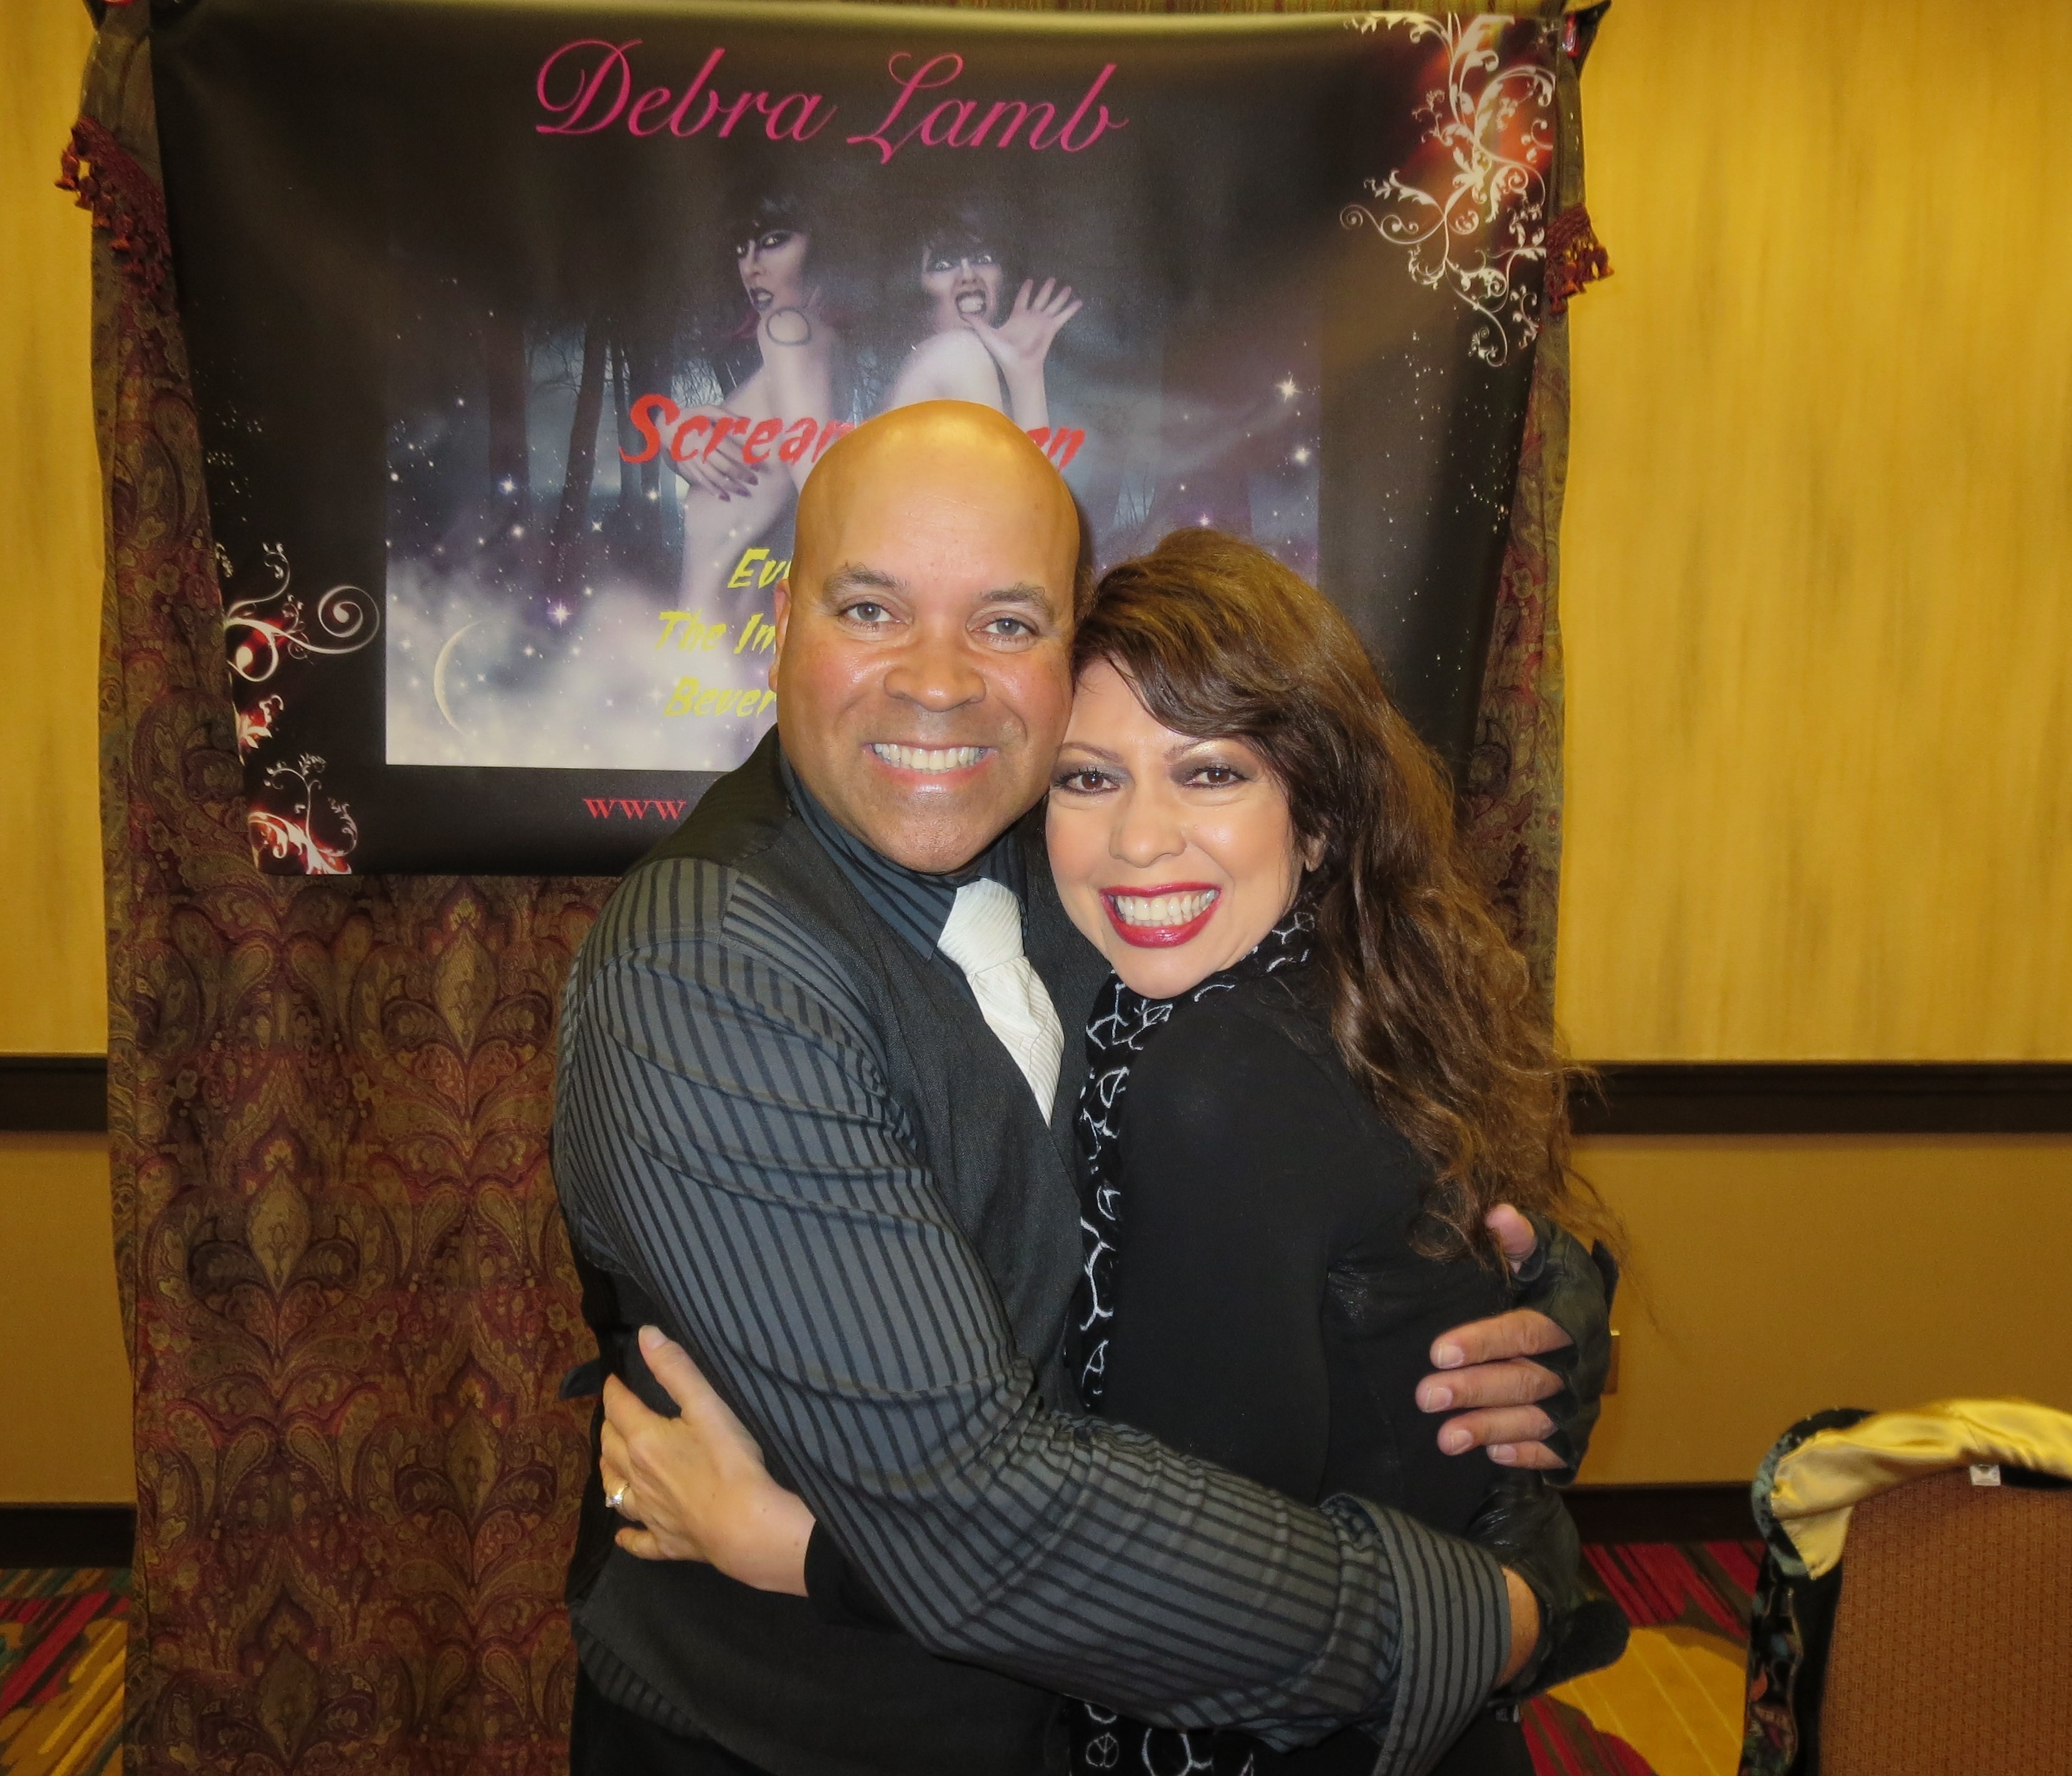 Debra Lamb with columnist/photographer, Oscar Benjamin, at the Twisted Terror Convention, March 29th, 2014 held at the DoubleTree Hotel, Sacramento, CA.